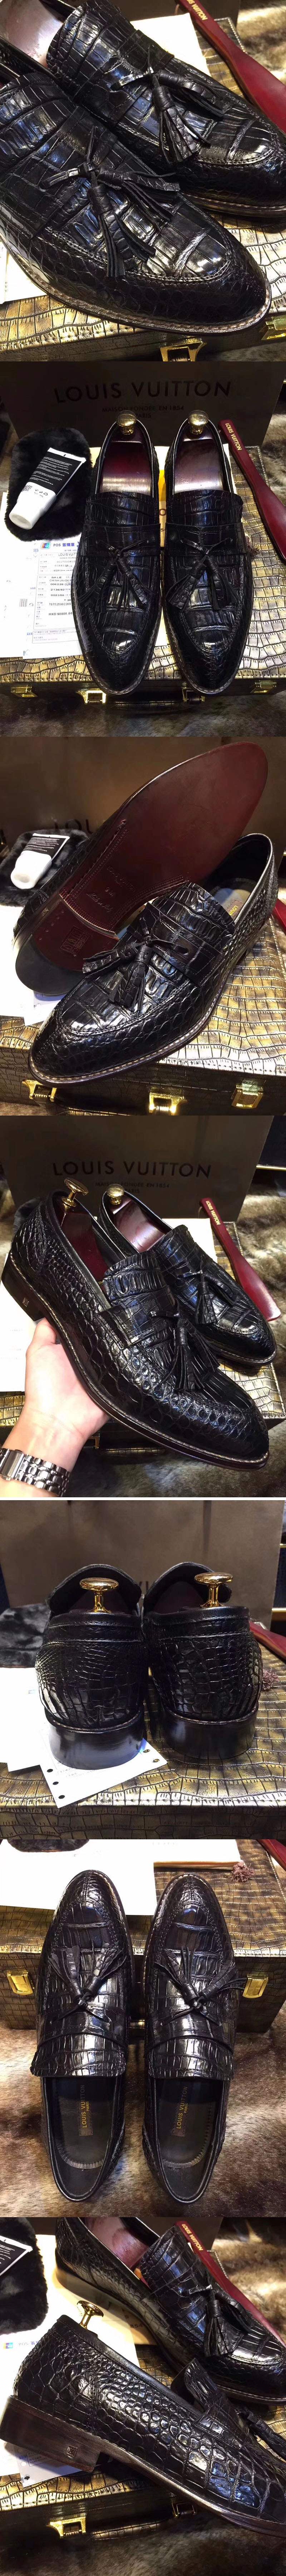 Replica Louis Vuitton Original Crocodile Leather Loafer and Shoes Black